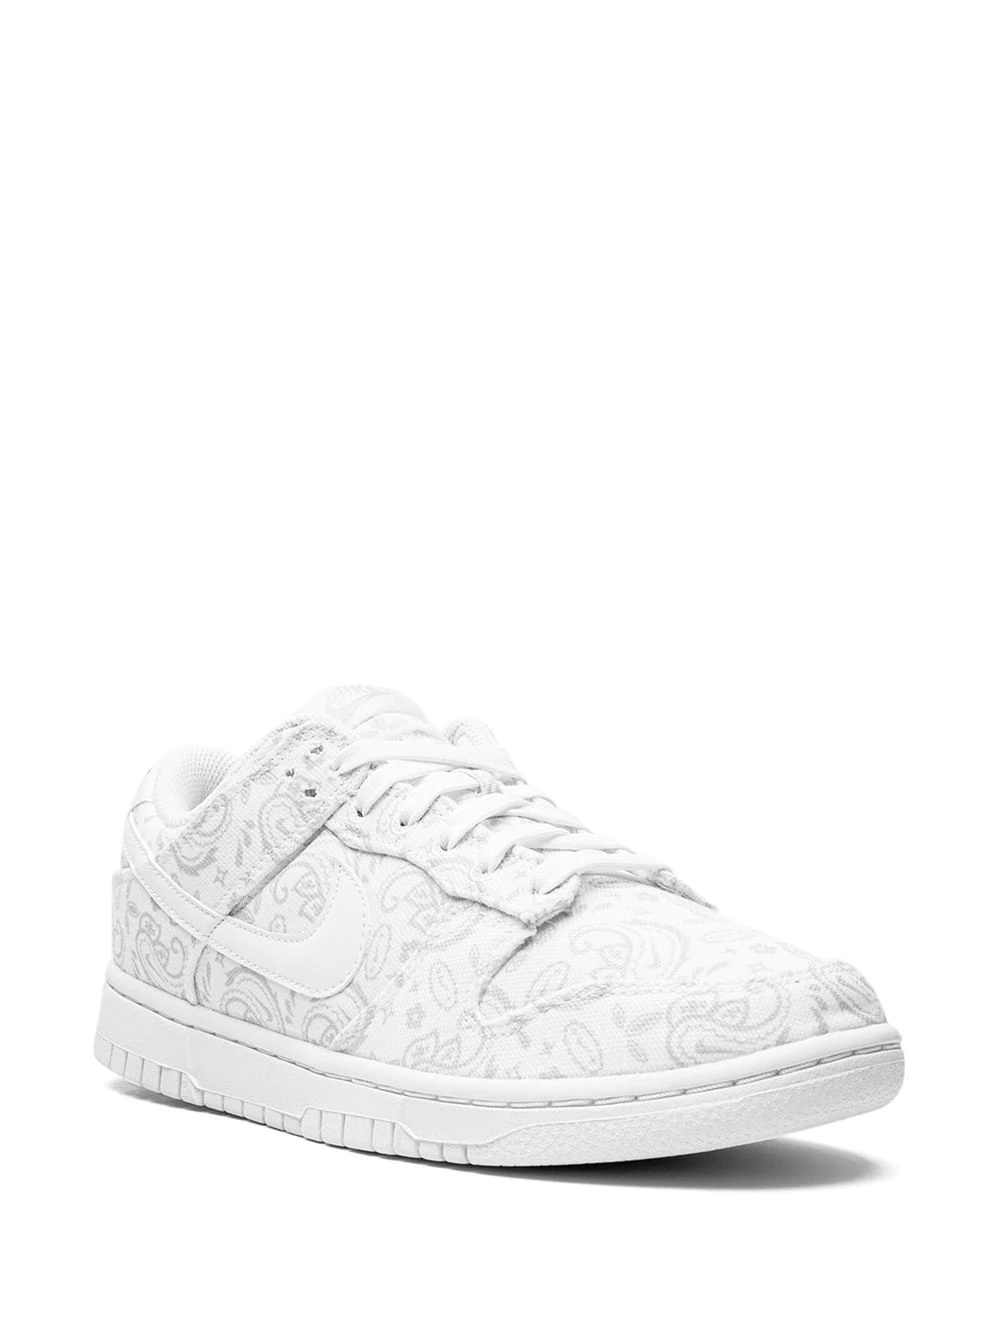 Dunk Low "White Paisley" sneakers - 2